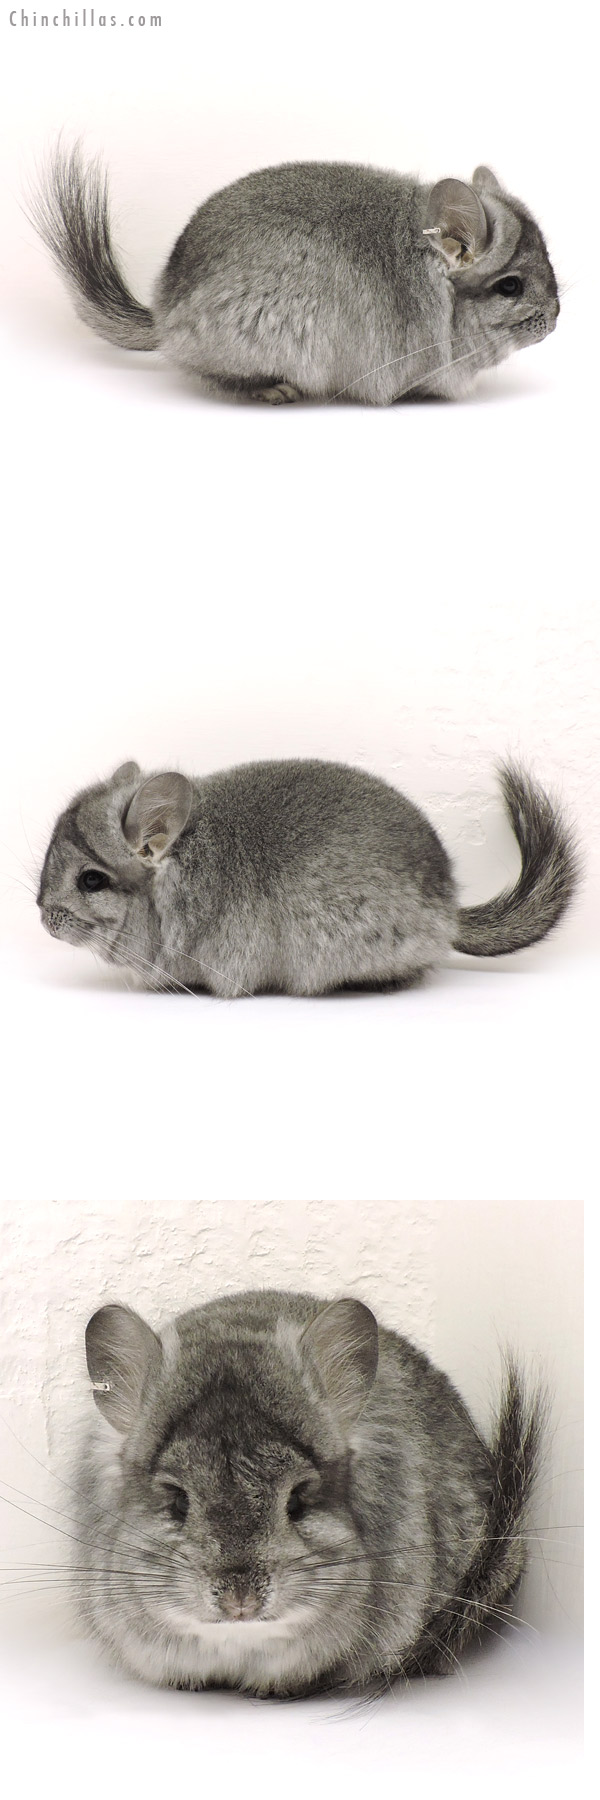 Chinchilla or related item offered for sale or export on Chinchillas.com - 14145 Standard ( Ebony Carrier )  Royal Persian Angora Male Chinchilla